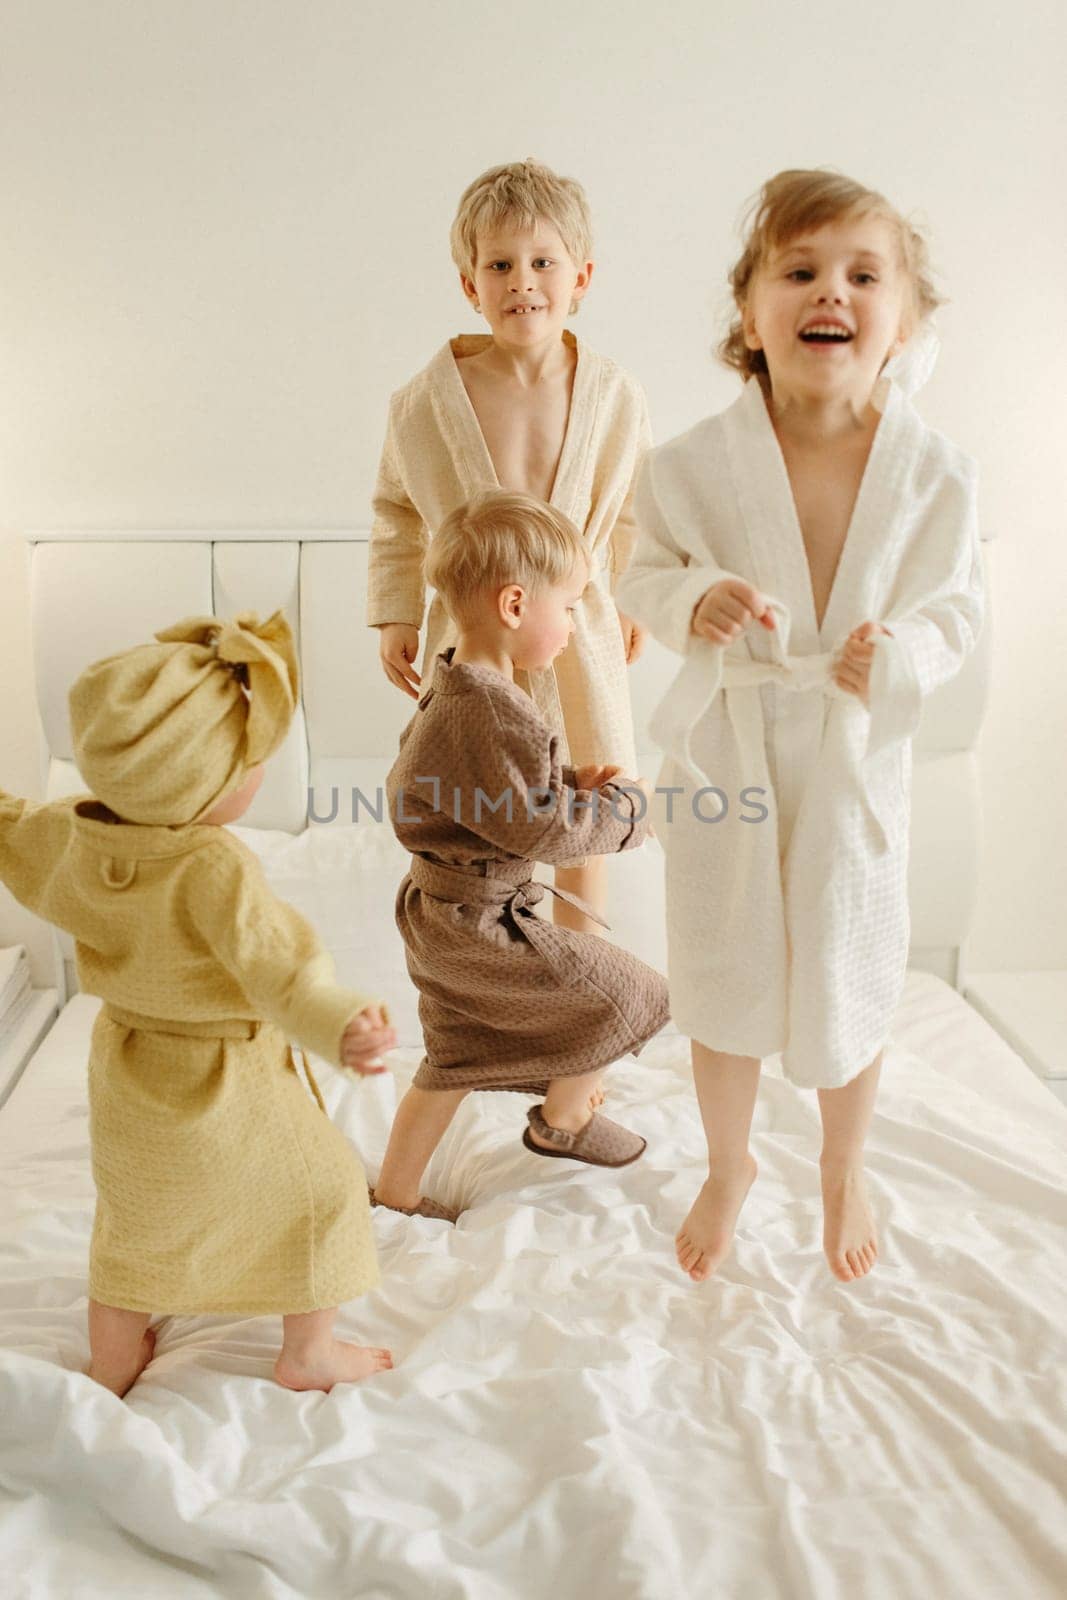 Joyful children in bathrobes play on the bed - they jump.